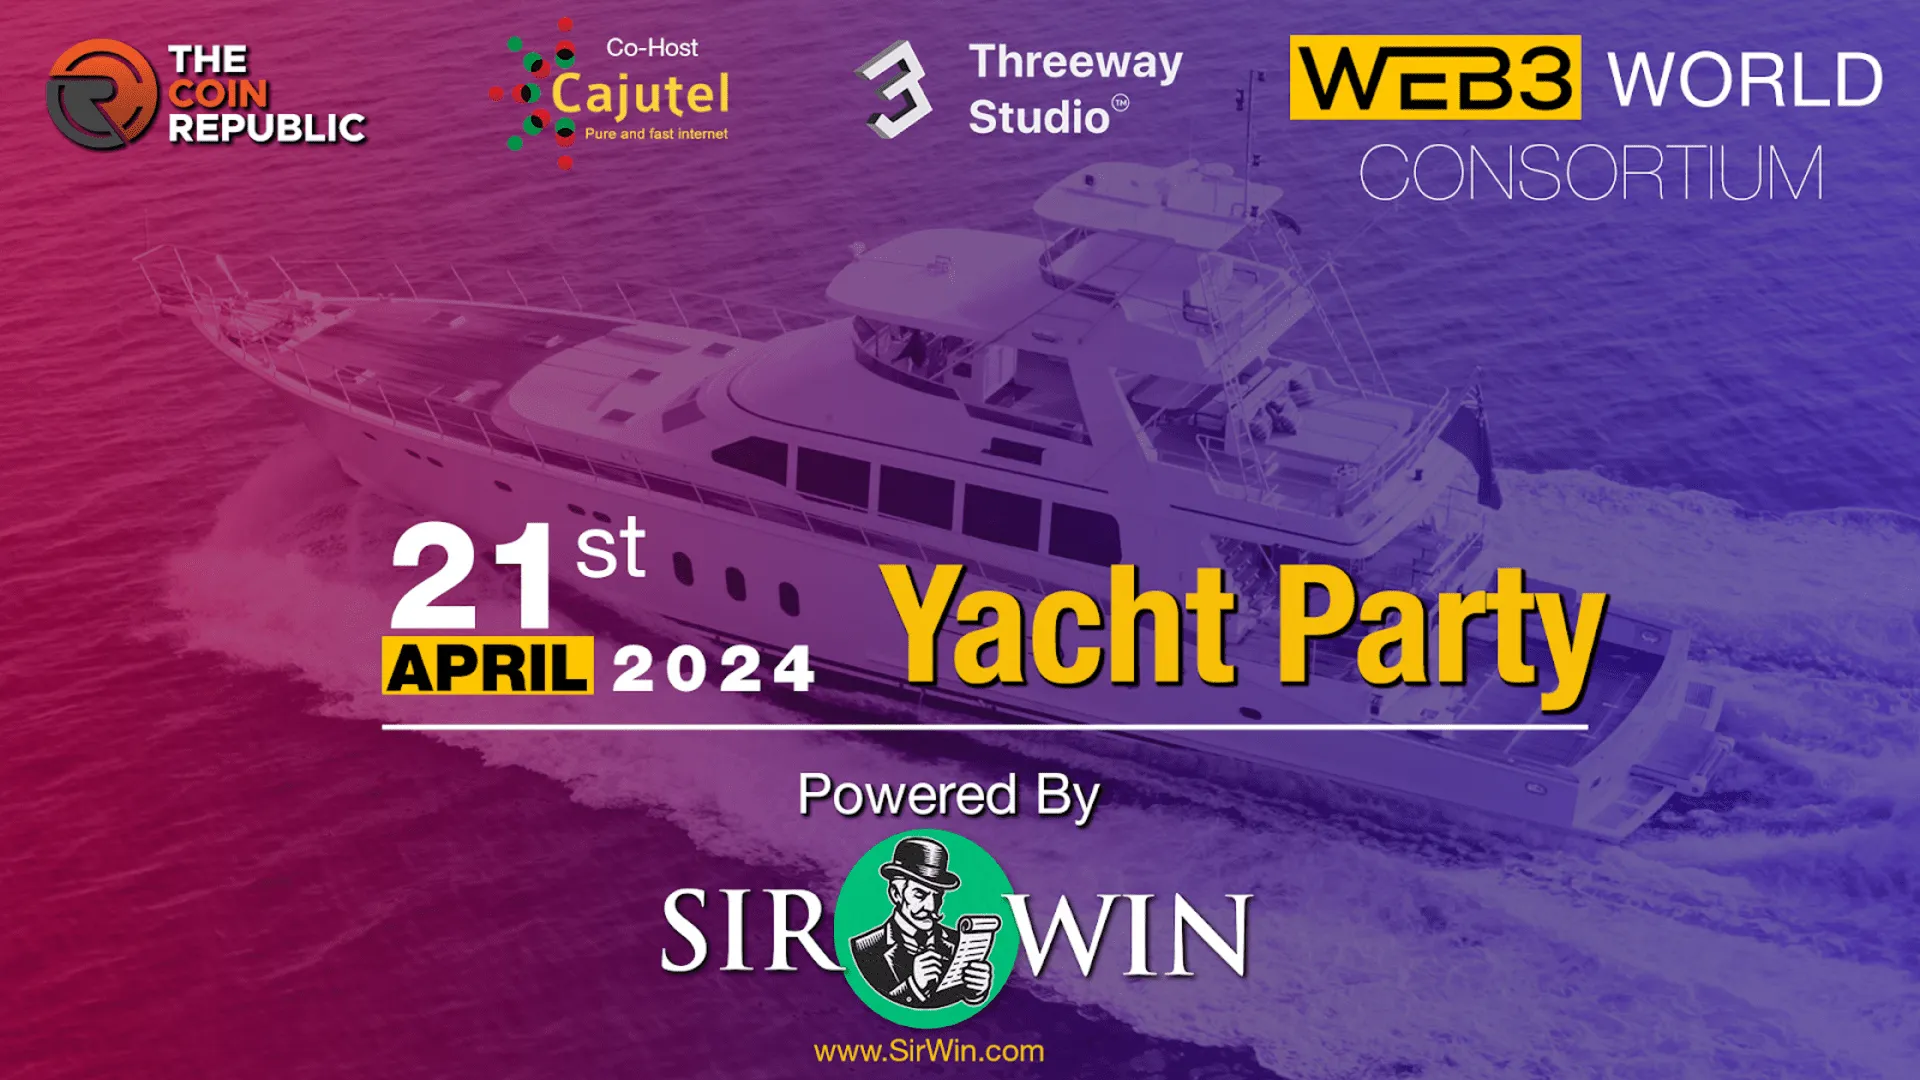 W3WC: The Pre-Reception Welcome Yacht Party Powered By SirWin, Crypto Casino & Betting